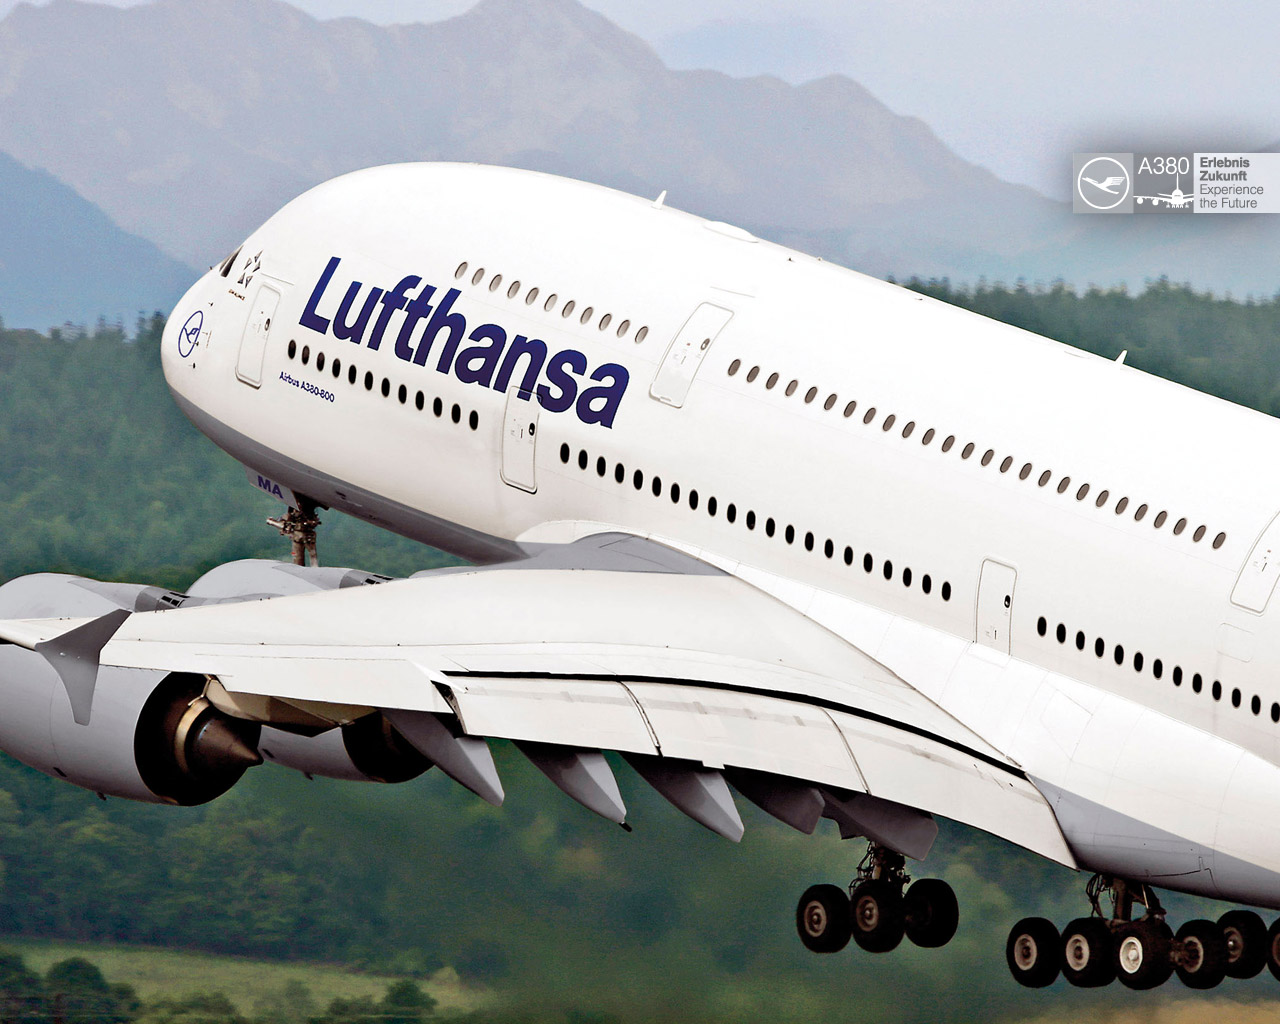 Form Below To Delete This A380 Wallpaper 04jpg Image From